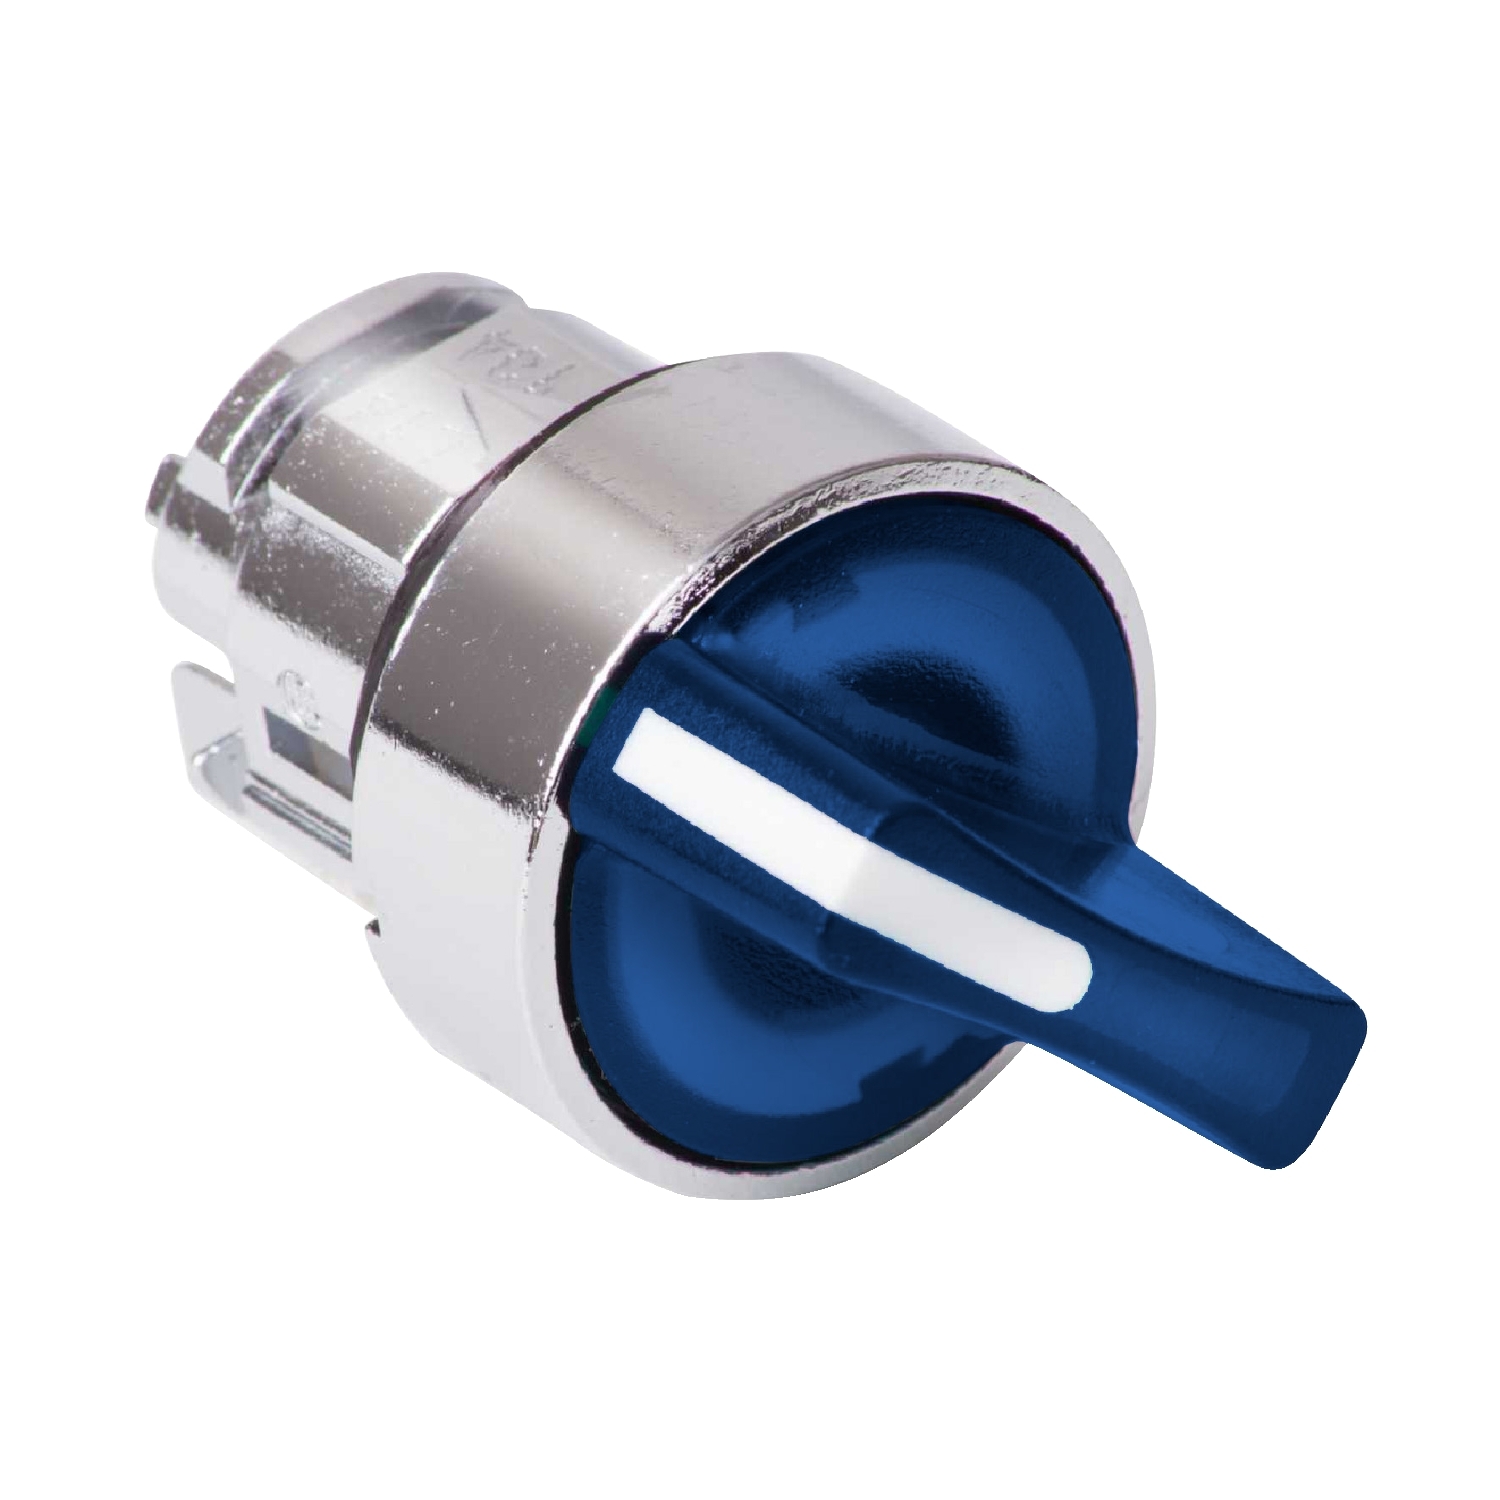 Head for illuminated selector switch, Harmony XB4, chromium metal, blue handle, 22mm, universal LED, 2 positions